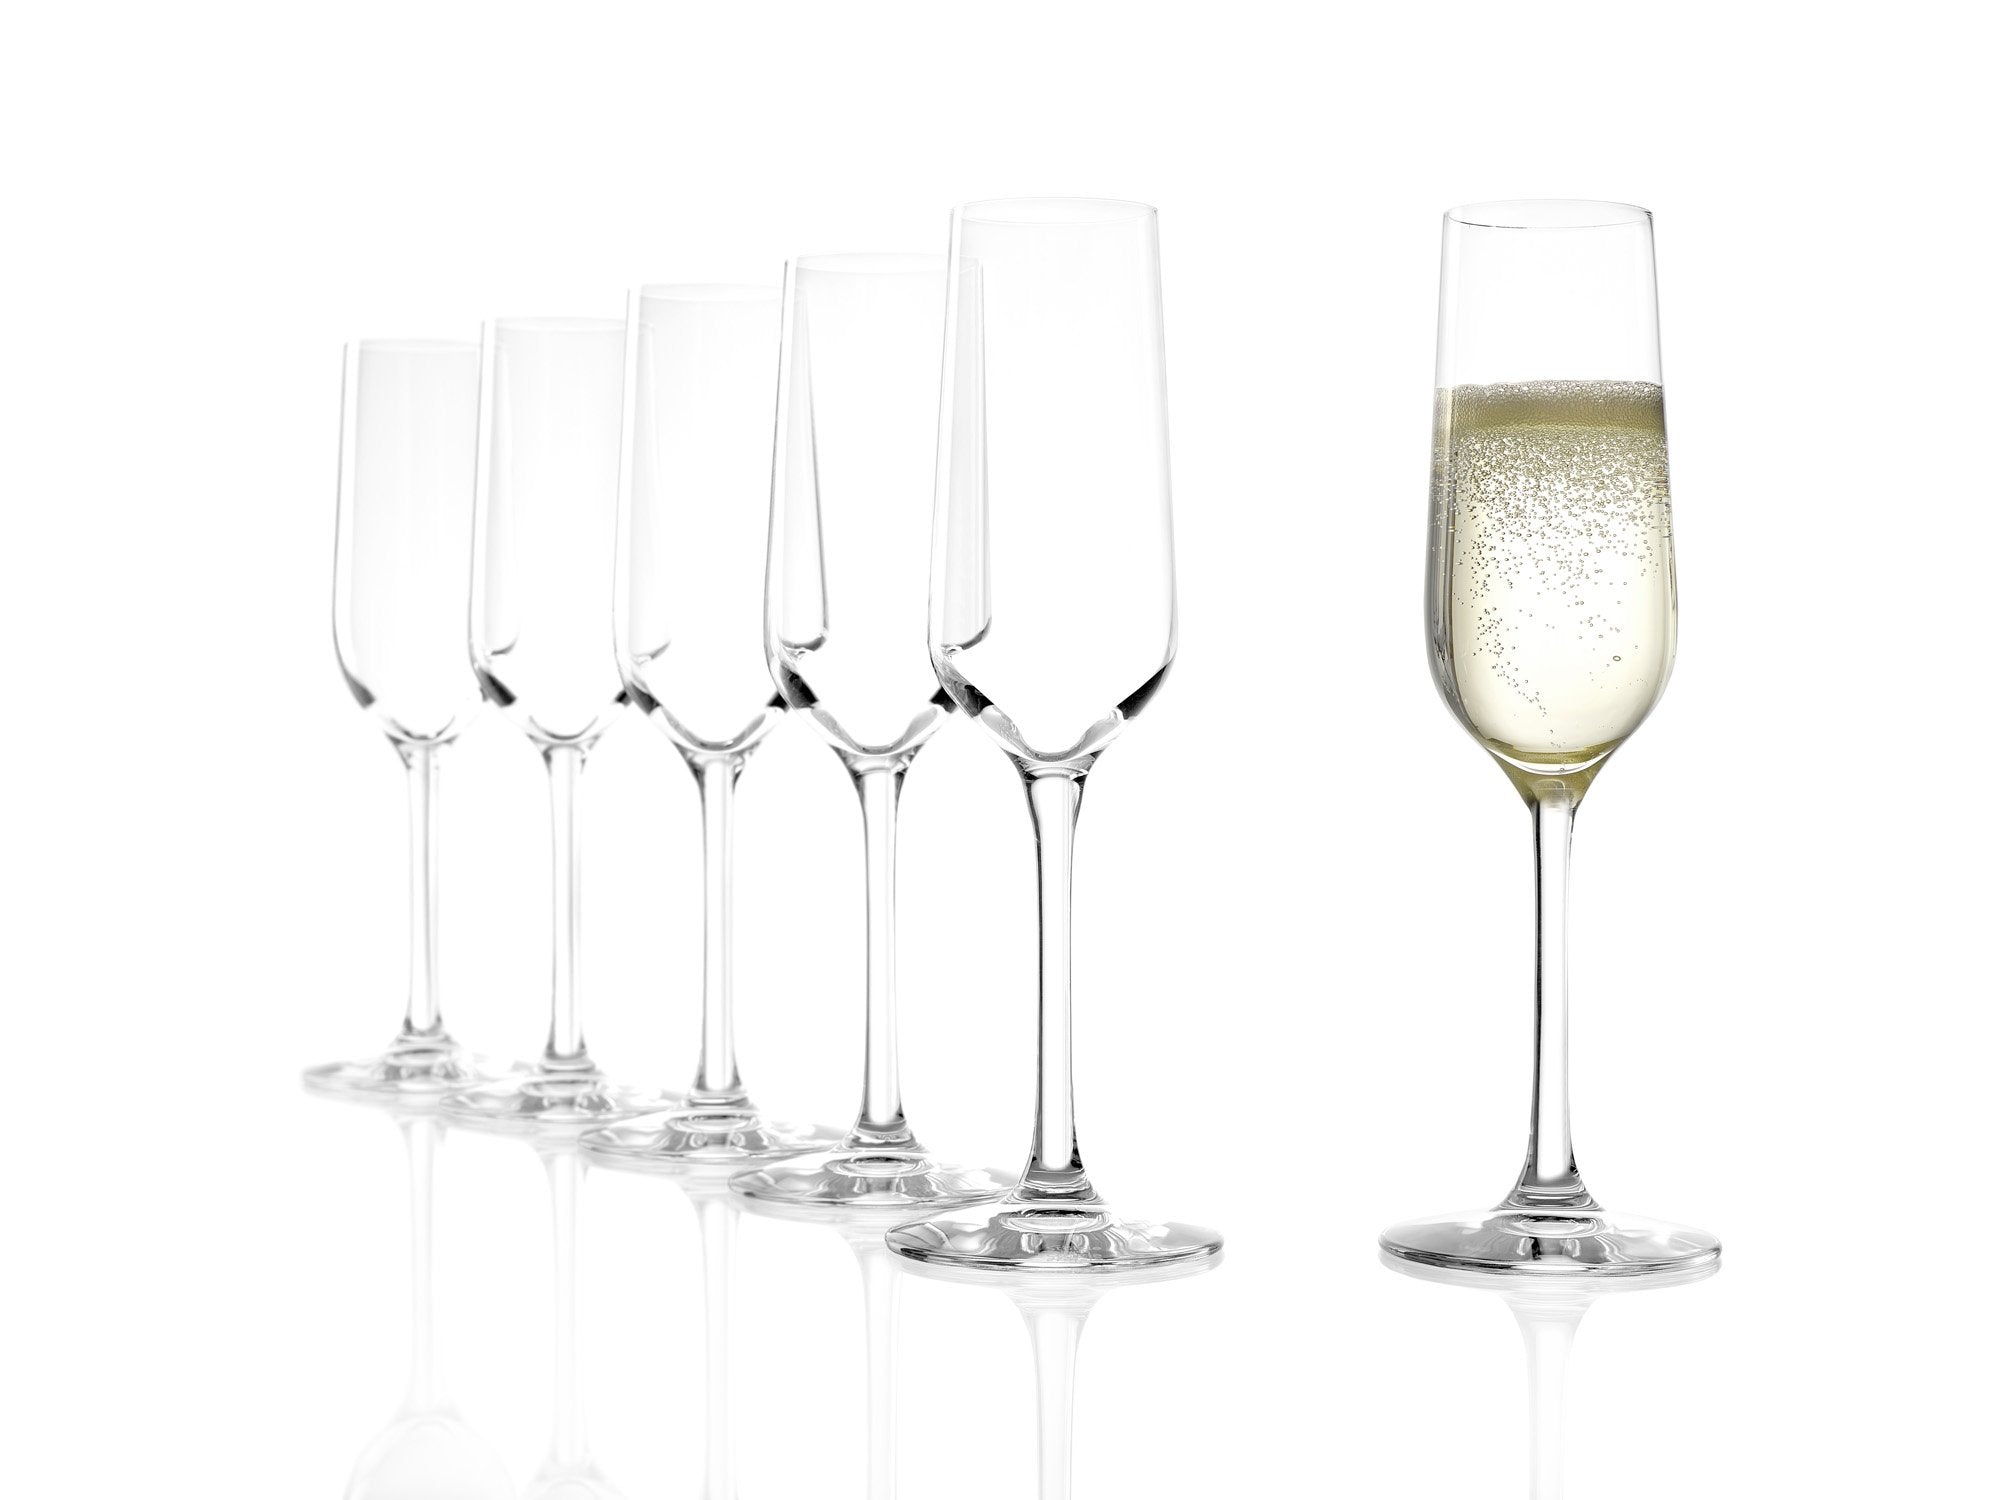 Stoelzle Revolution Champagne Sparkling Glass Lead Free Crystal